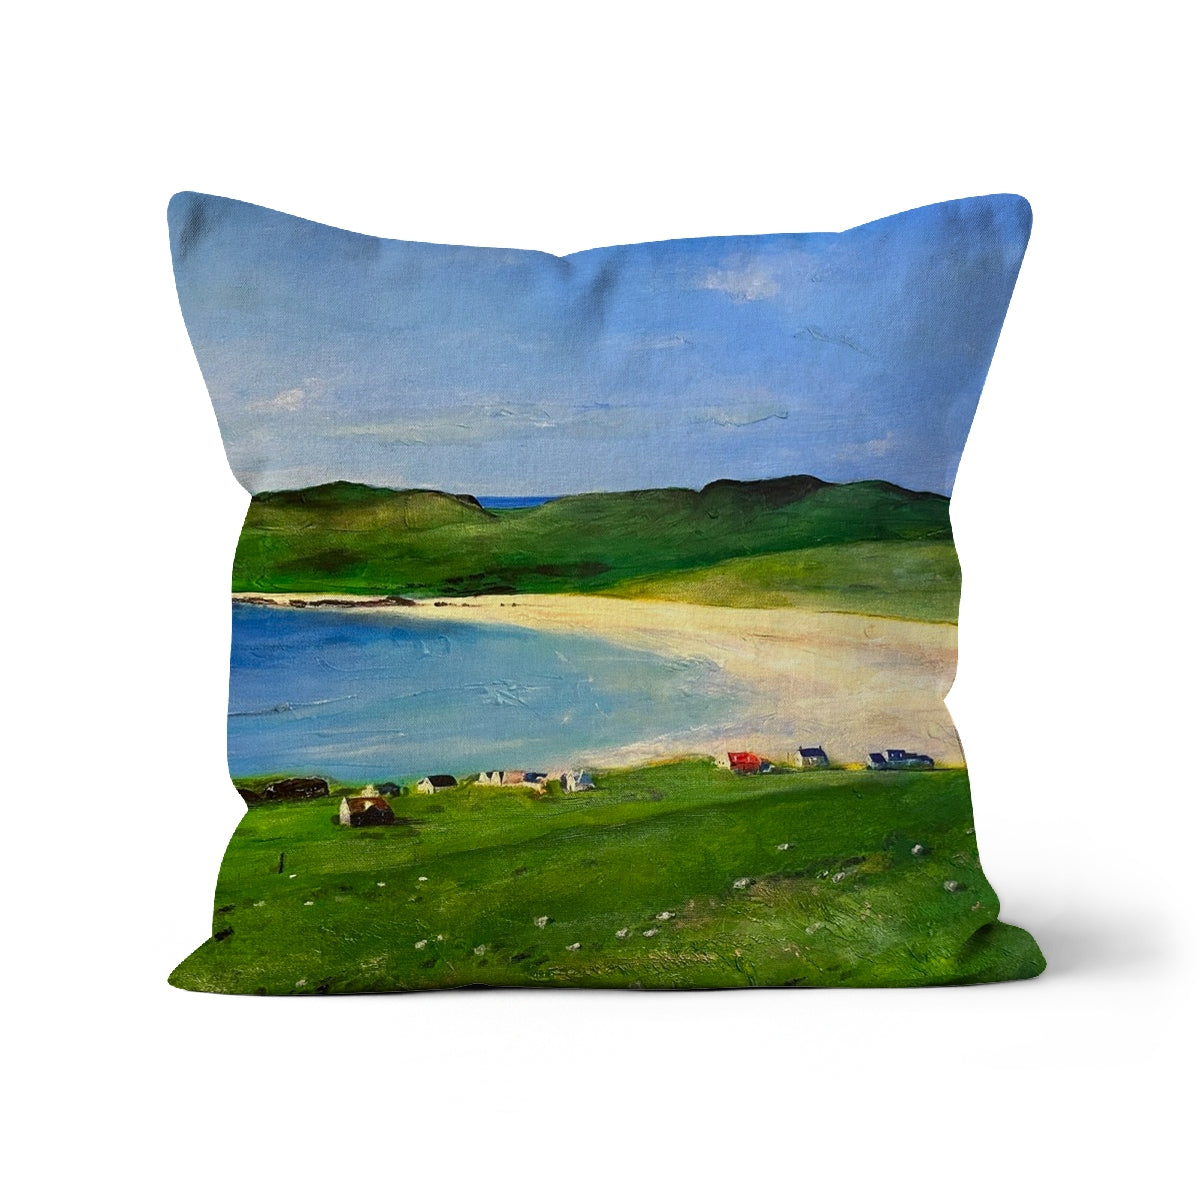 Balephuil Beach Tiree Art Gifts Cushion-Cushions-Hebridean Islands Art Gallery-Faux Suede-12"x12"-Paintings, Prints, Homeware, Art Gifts From Scotland By Scottish Artist Kevin Hunter